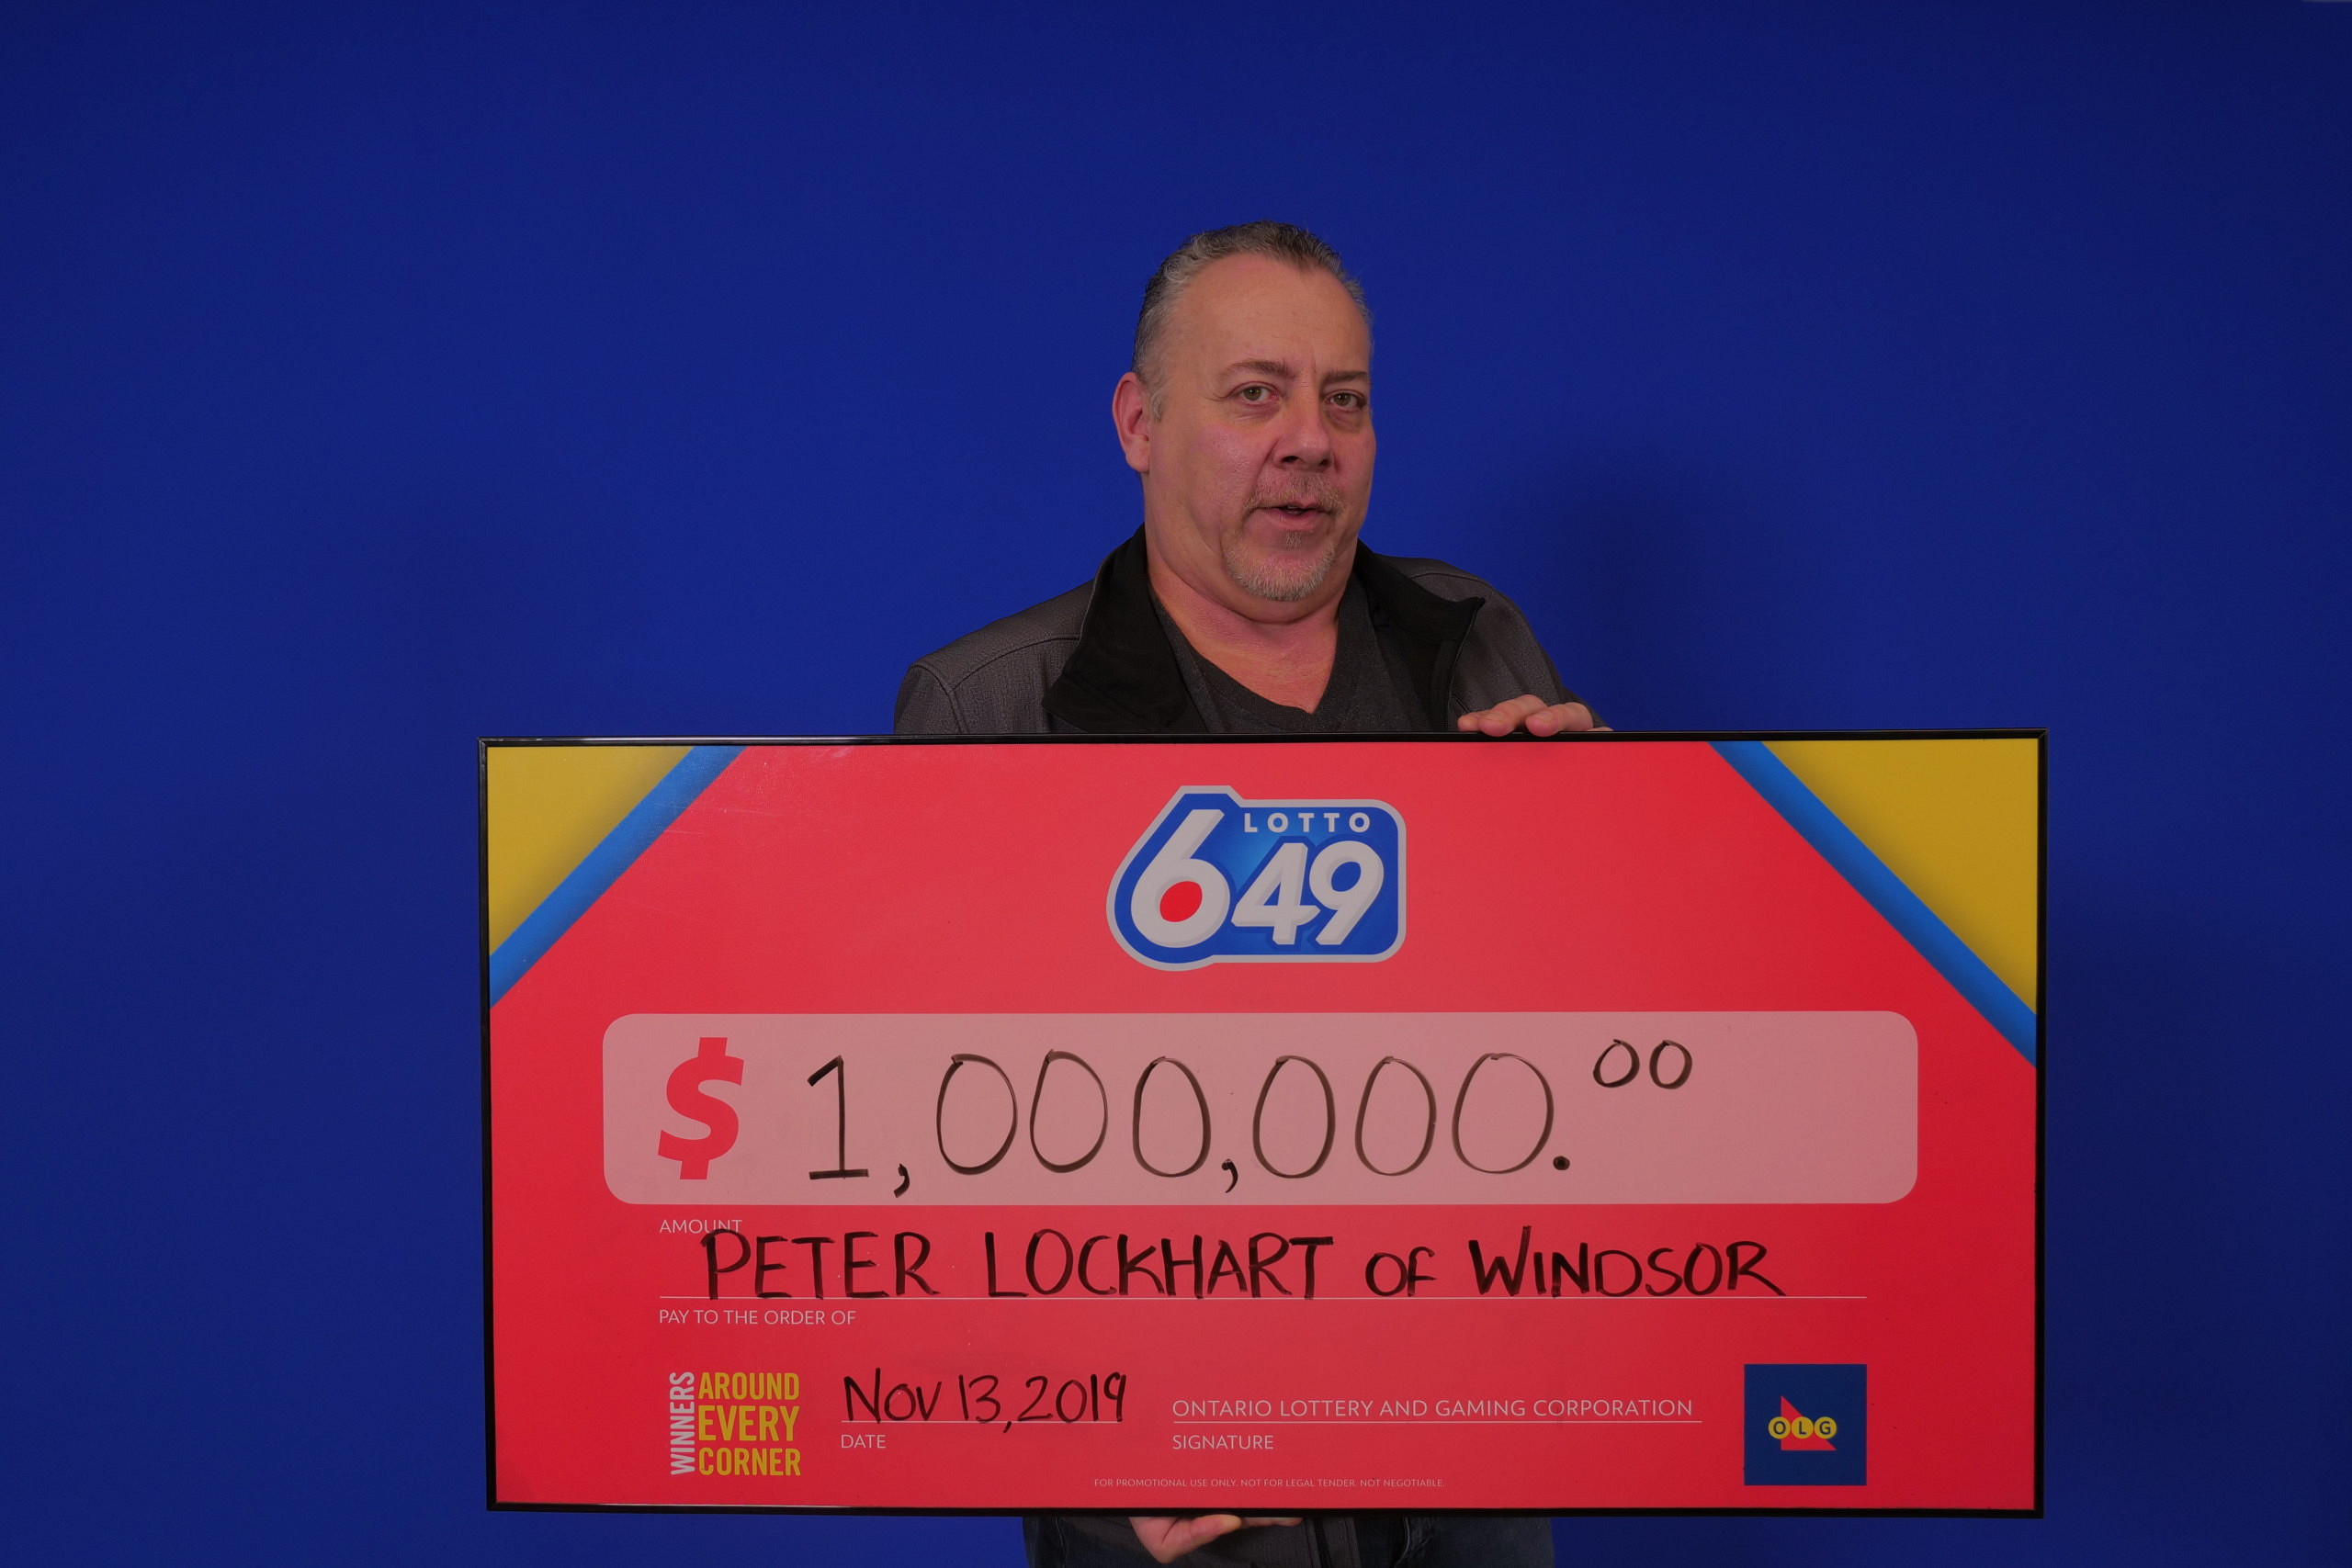 lotto 649 special draw